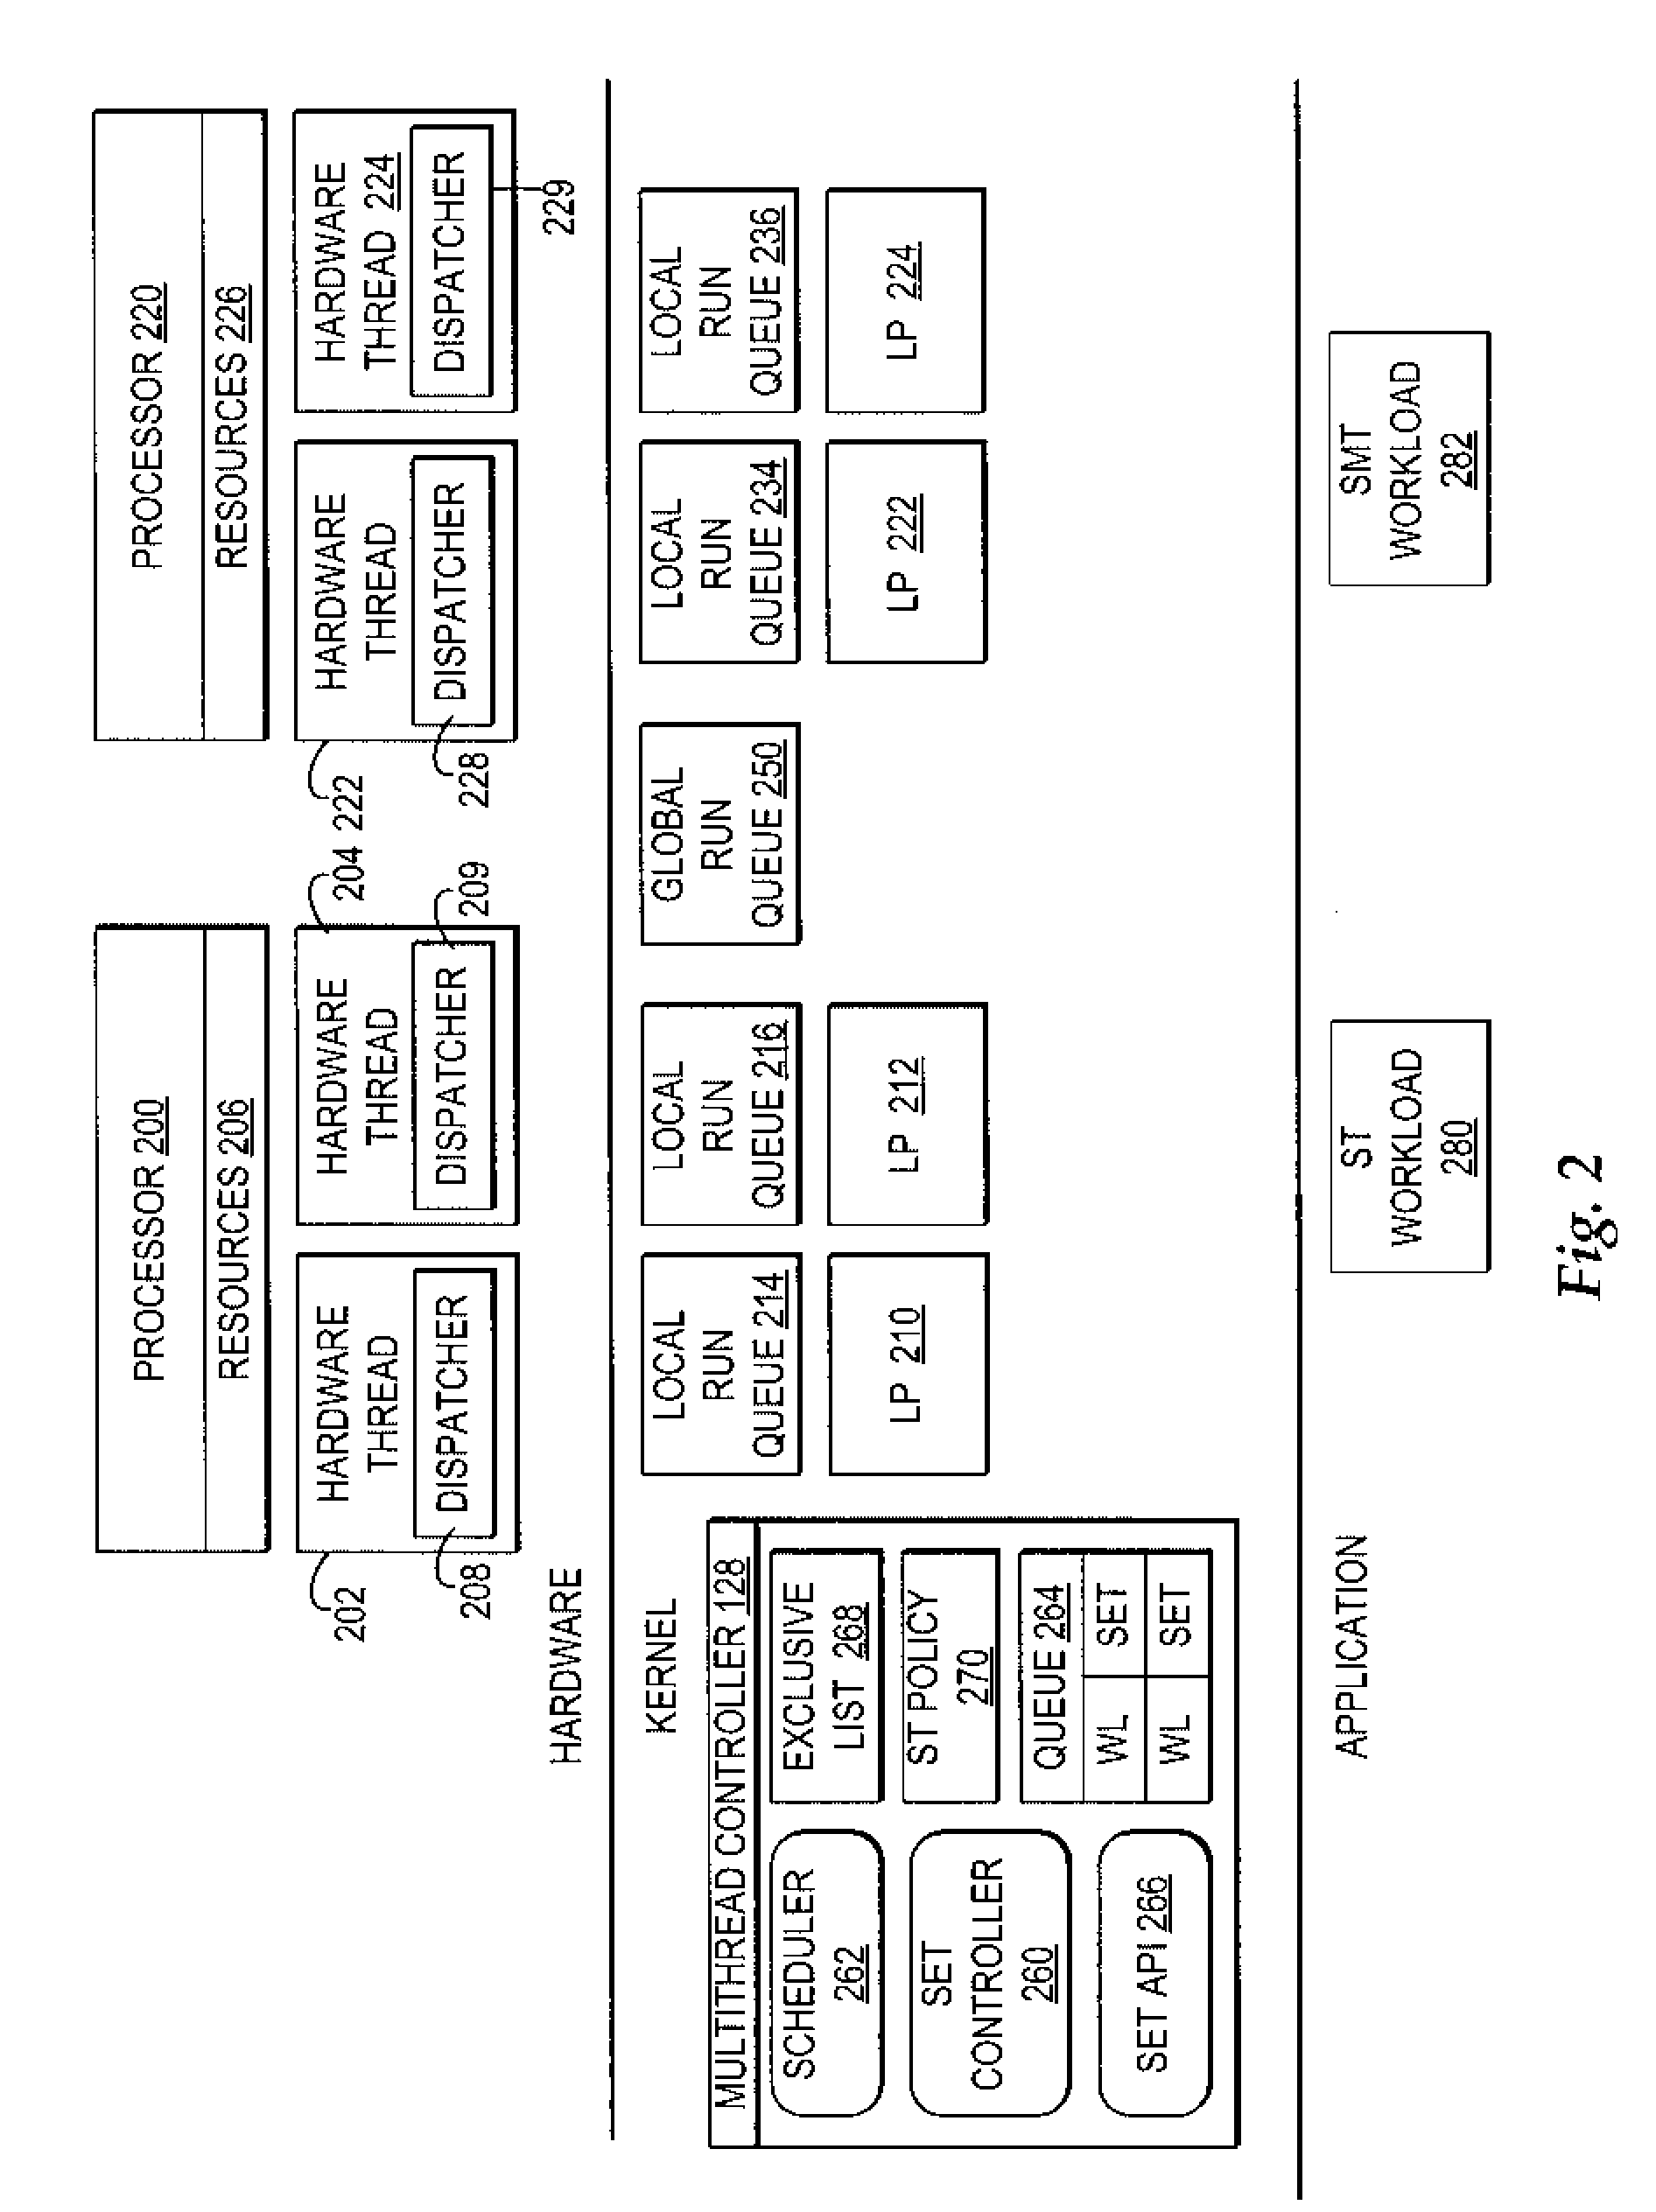 Managing execution of mixed workloads in a simultaneous multi-threaded (SMT) enabled system